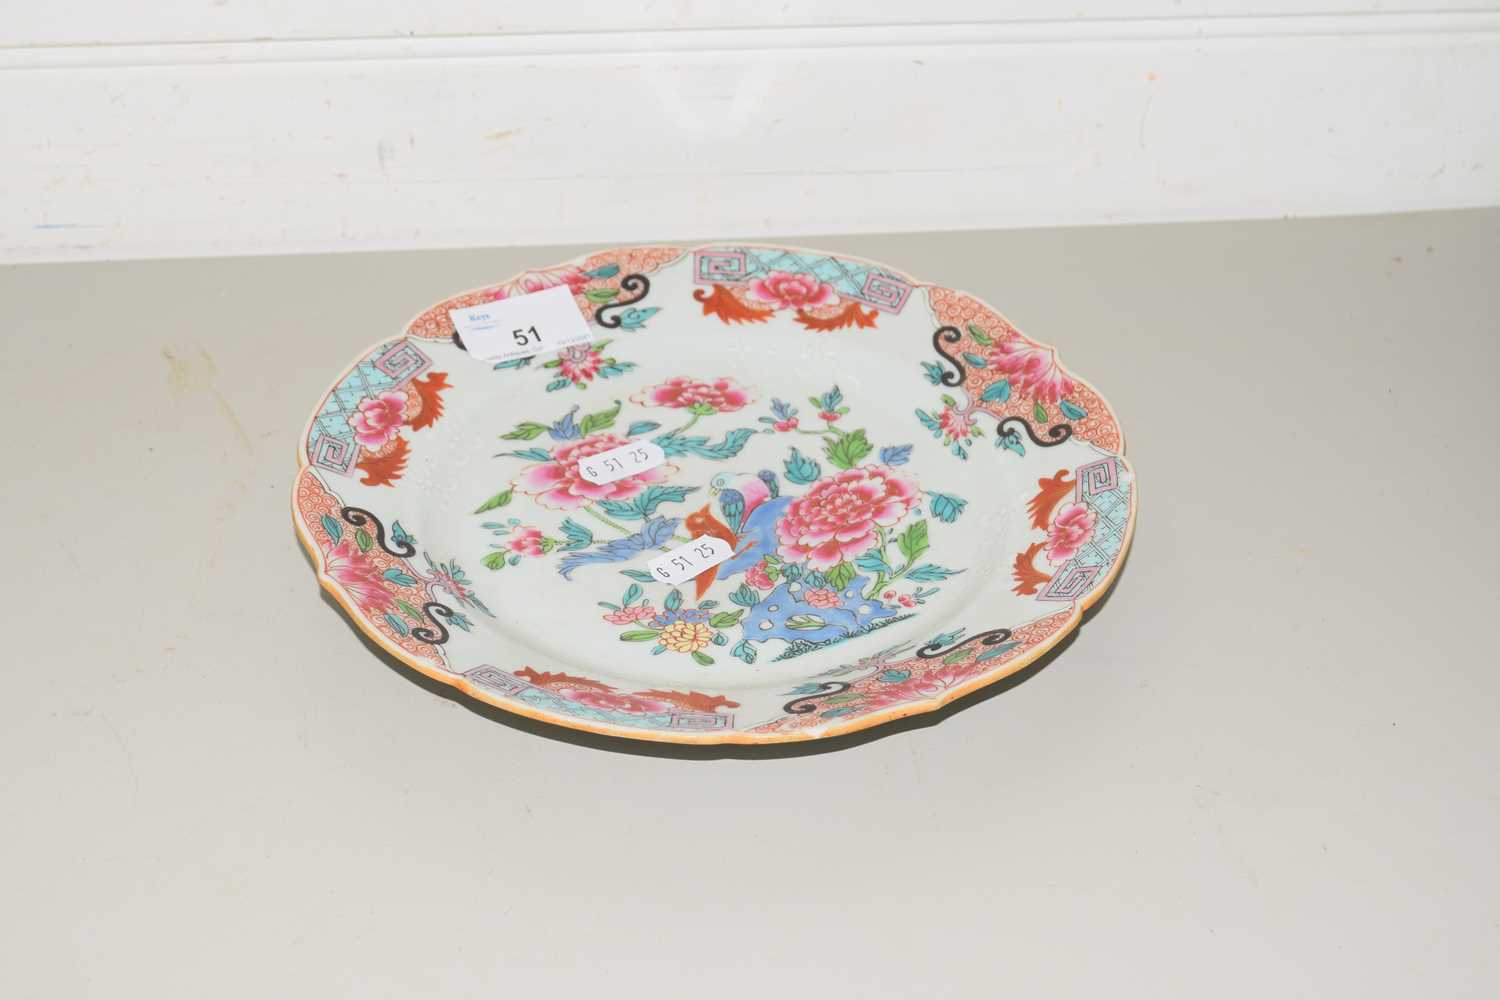 CHINESE PLATE WITH ENAMELLED DECORATION, CENTRAL SPRAY OF FLOWERS WITH BIRDS